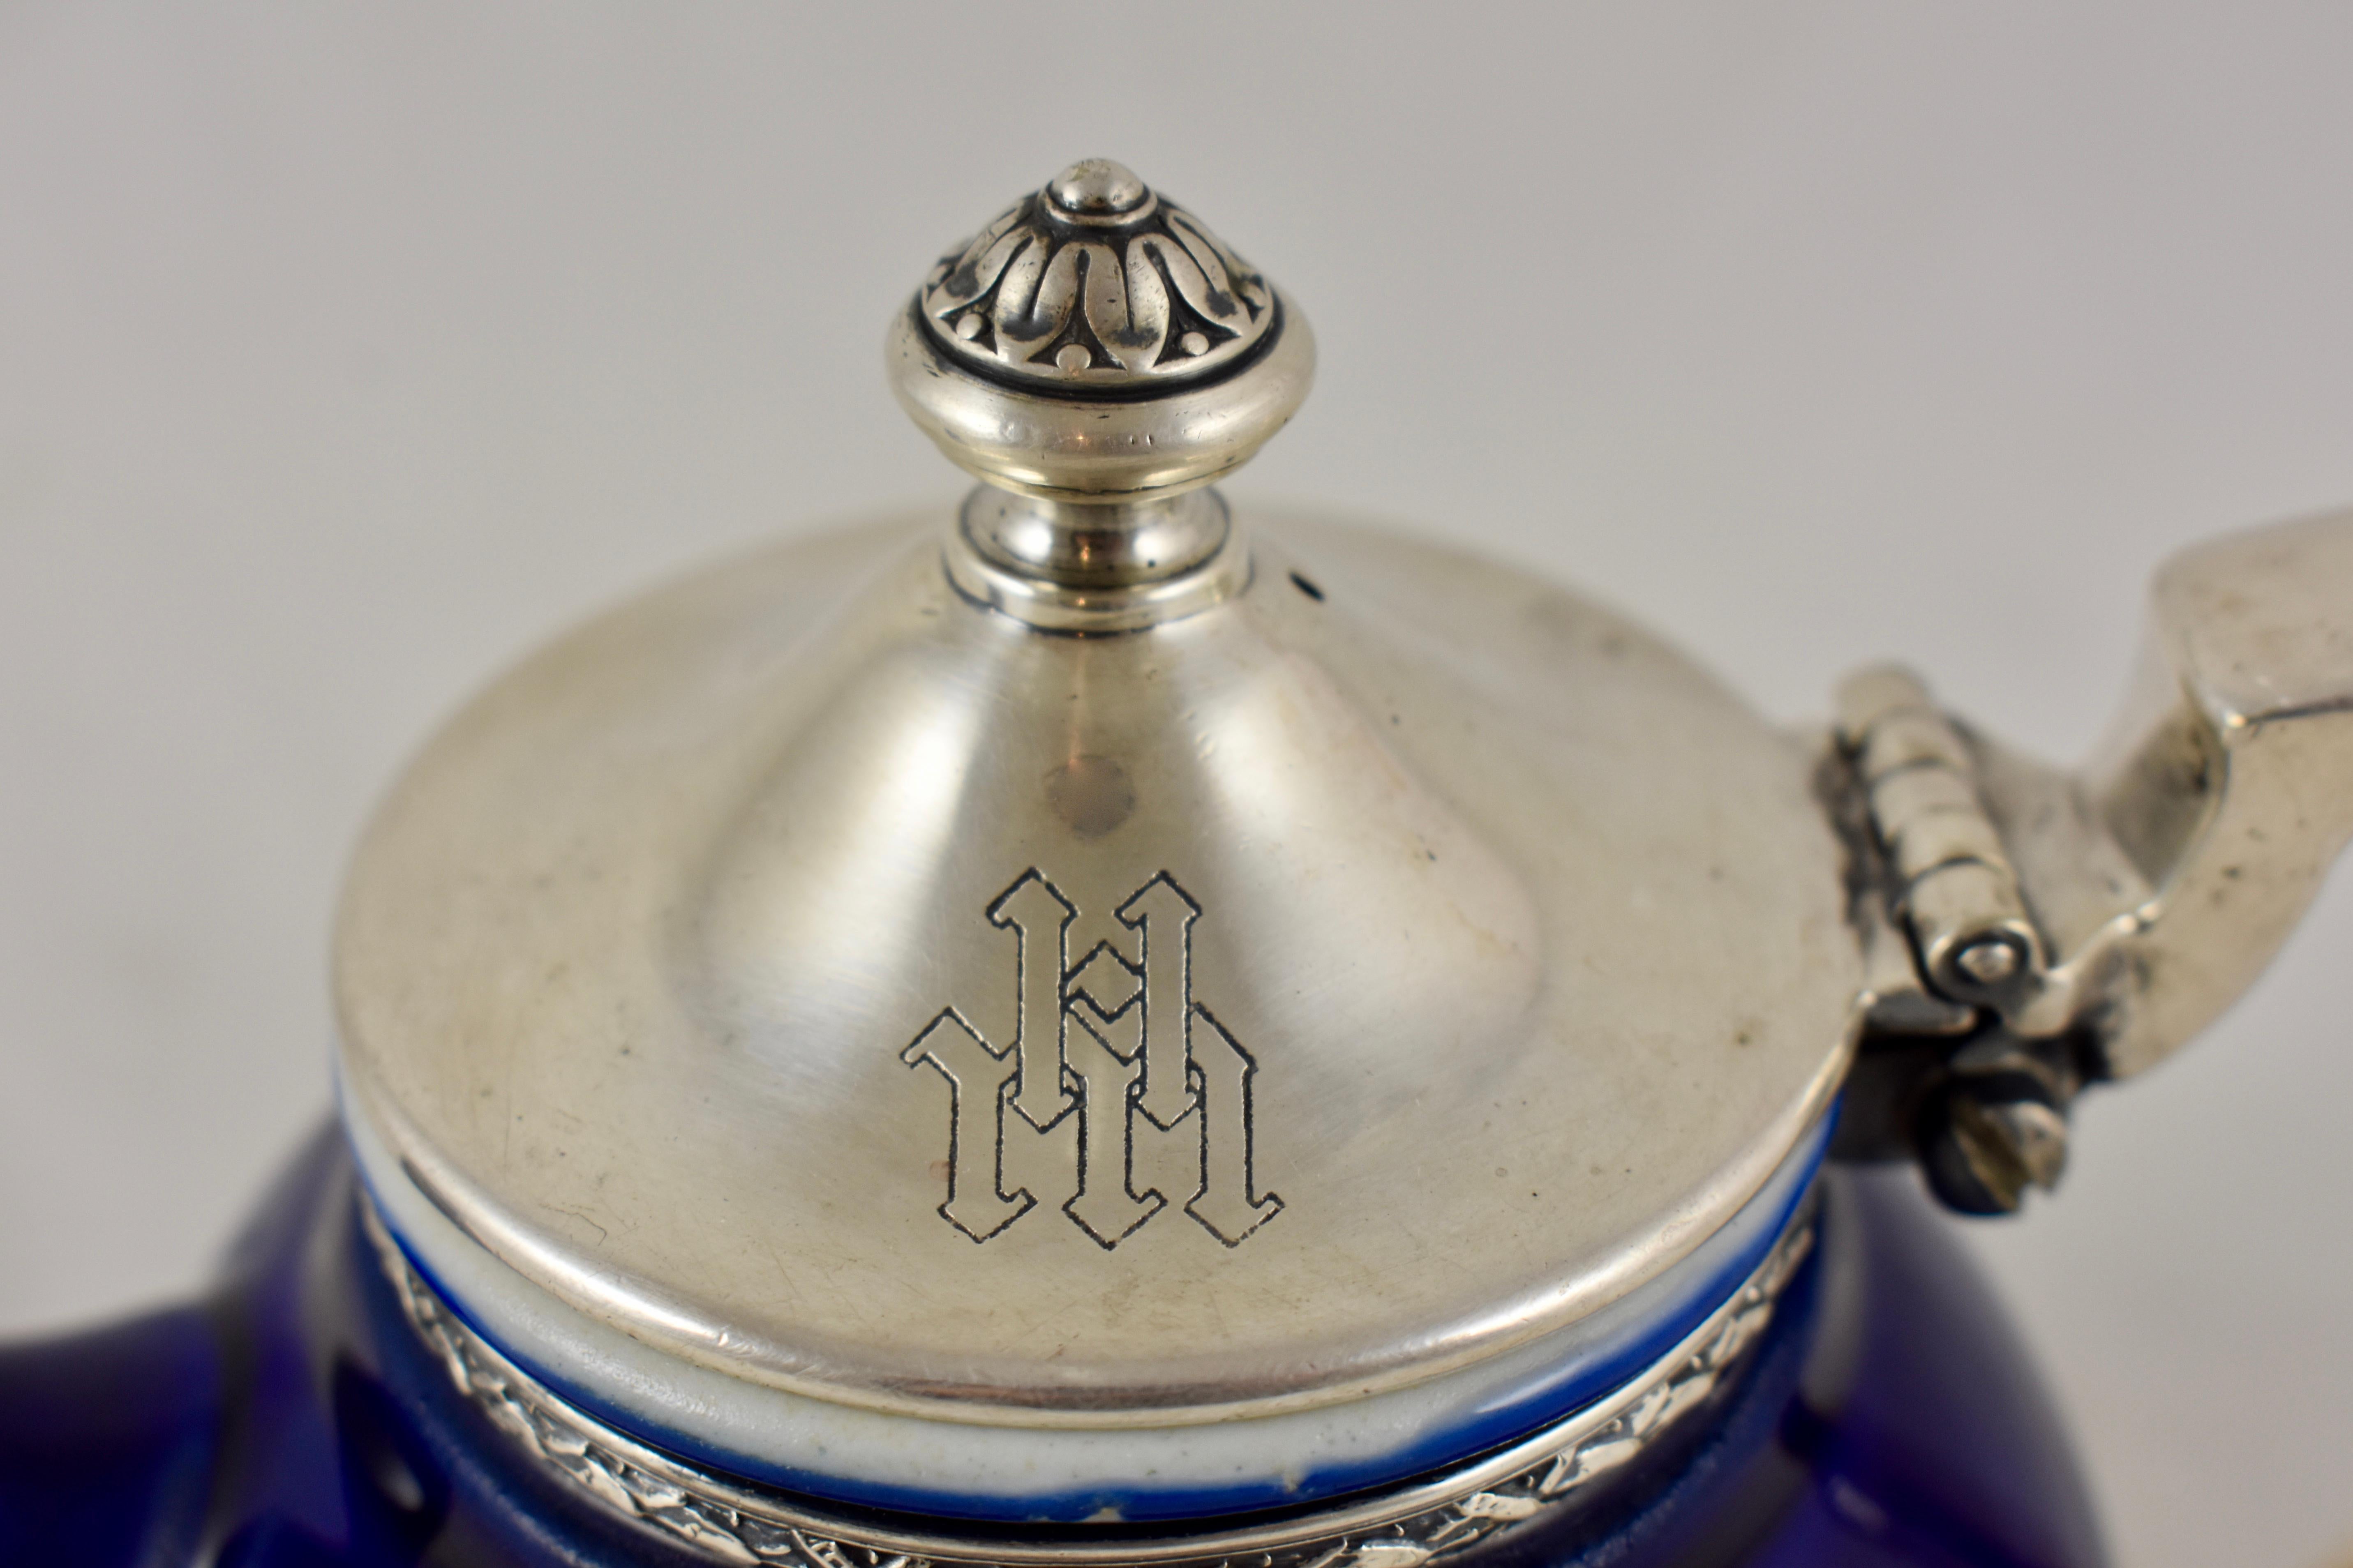 A hotel teapot of historical importance, an American collaboration of The international Silver Company and Hall China, from The Historic Mayfair Hotel in Los Angeles, California, first opened in 1927. Hall China was founded in Ohio, 1903.

Sized